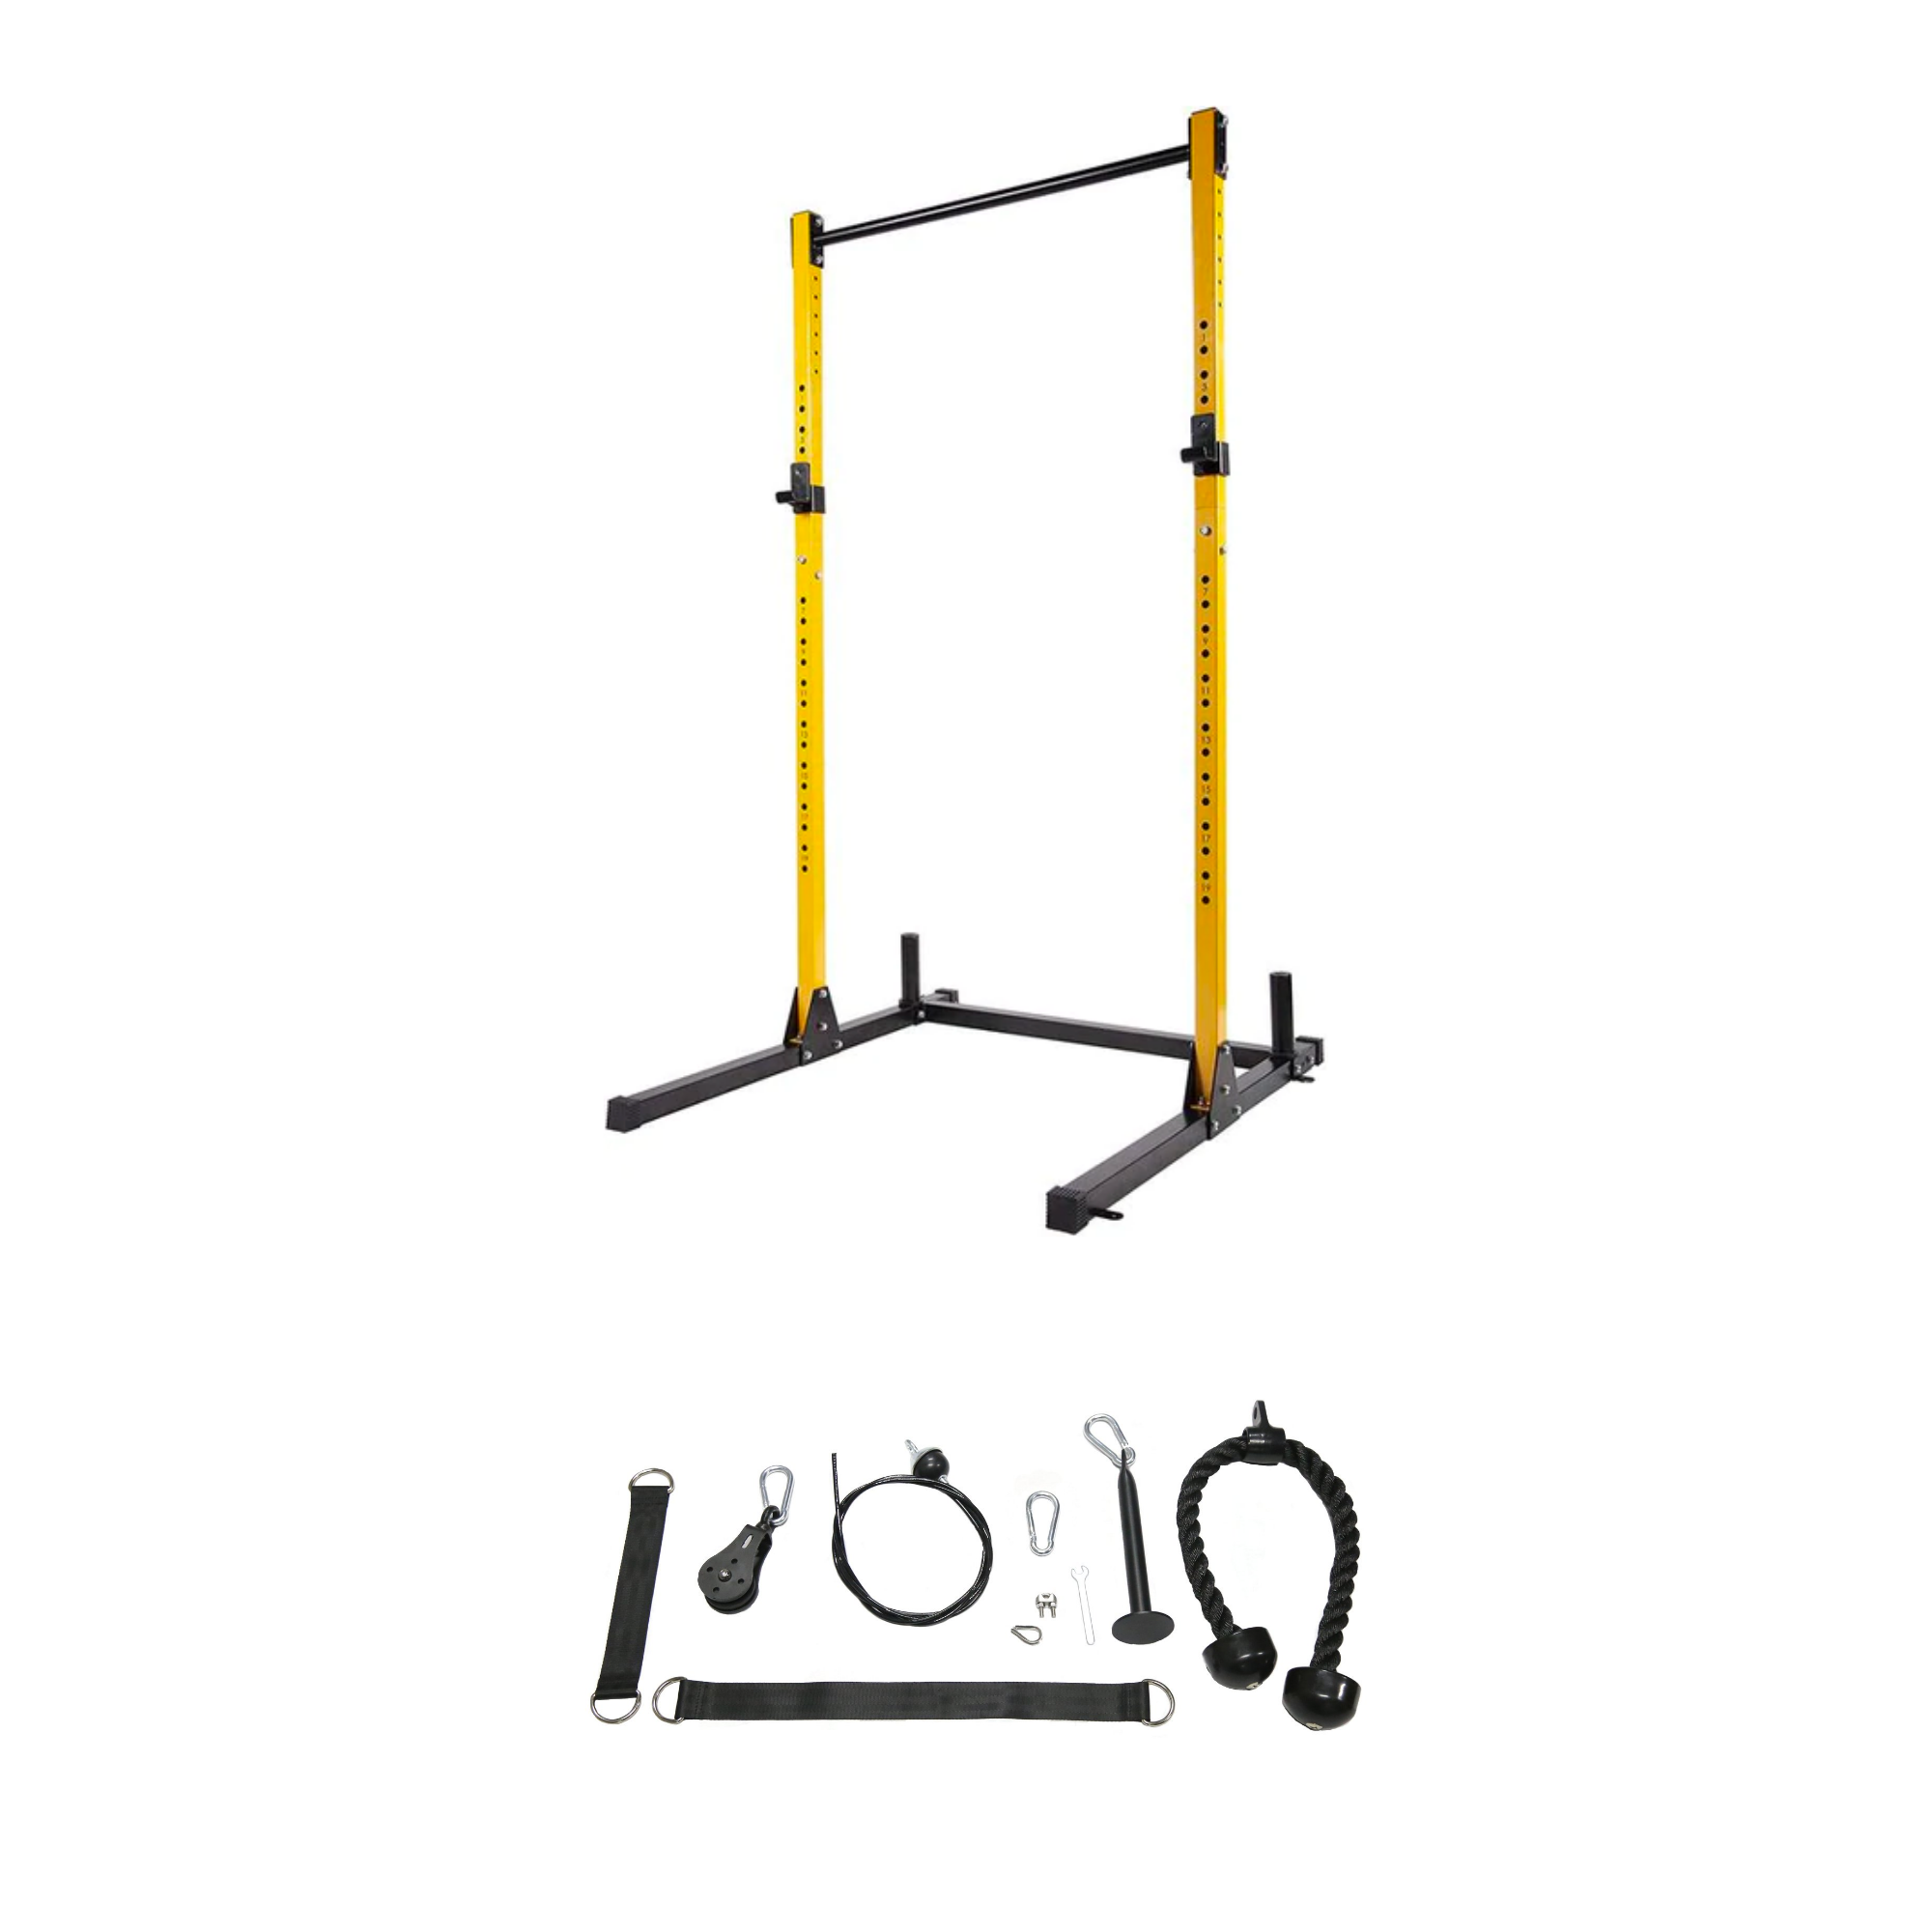 Gym; Home Gym; Garage Gym; Health; Exercise; Exercise Equipment; Fitness; Strength & Conditioning; Strength Training; Attachments; Accessories; Squat Stand; Squat Rack; Cable Machine; Cable Attachments; Cable Pulley System